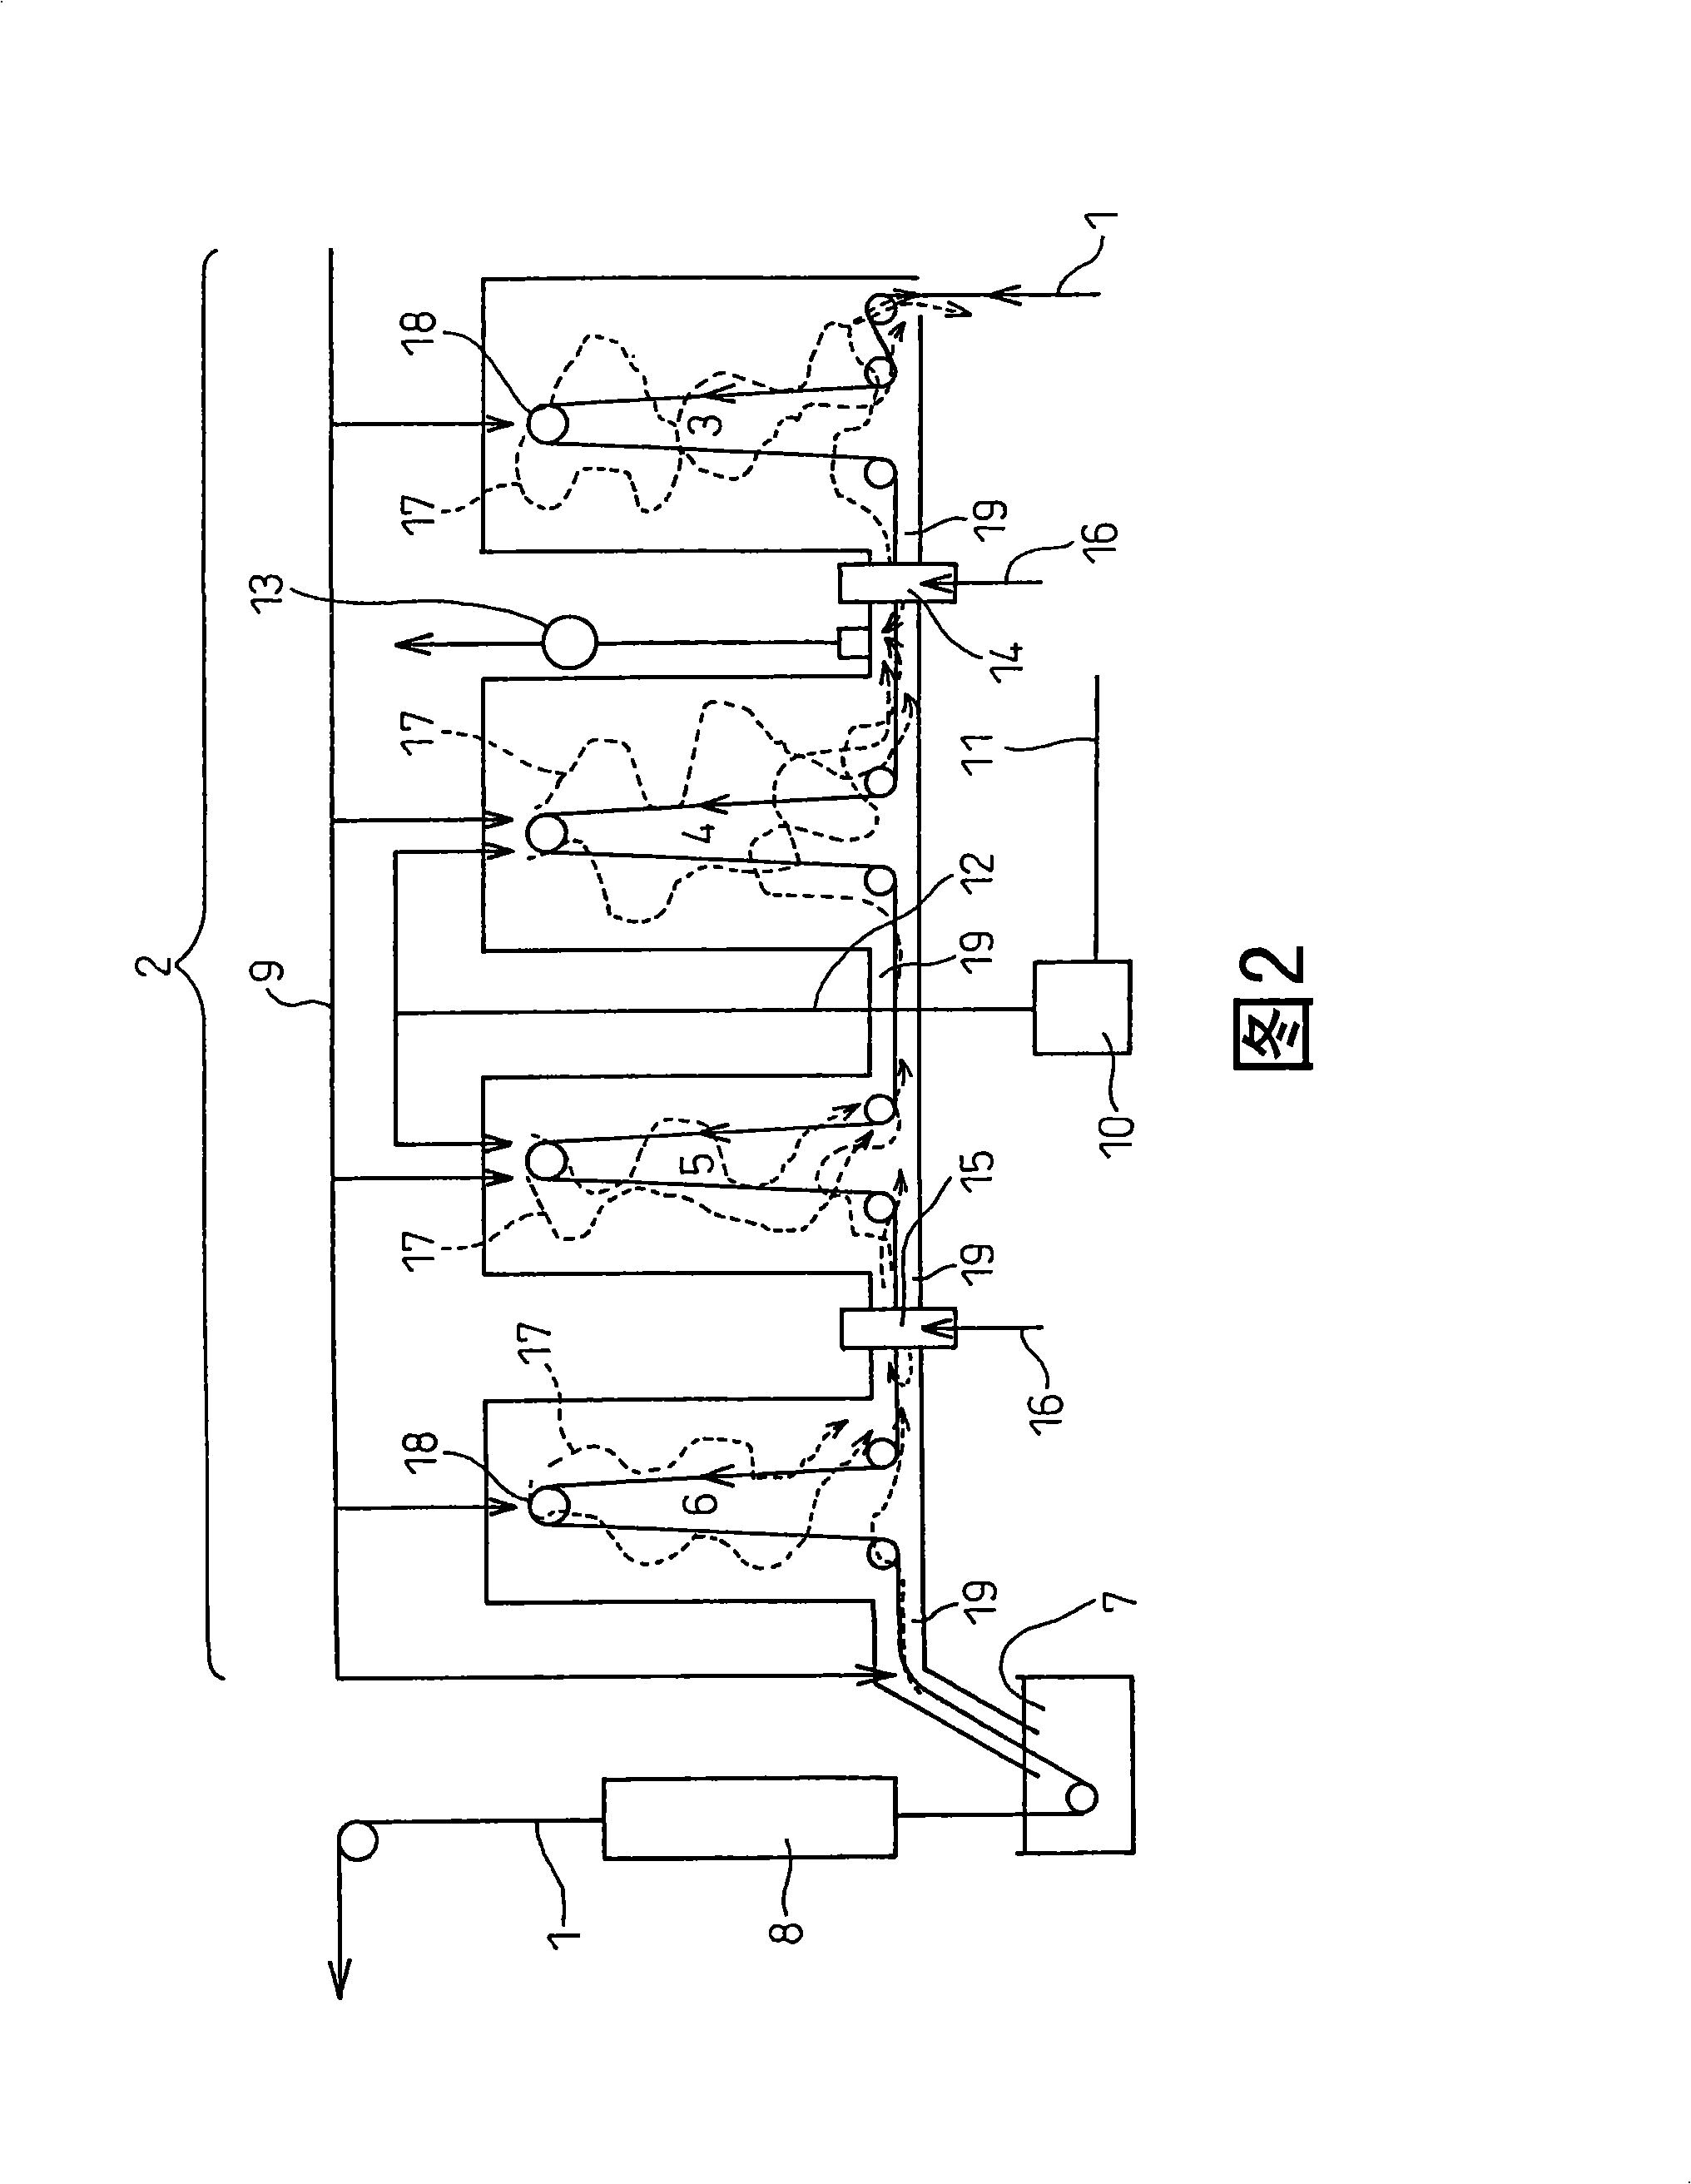 Method of continous annealing/hot-dipping of steel sheet containing silicon and apparatus for continuous annealing/hot-dipping